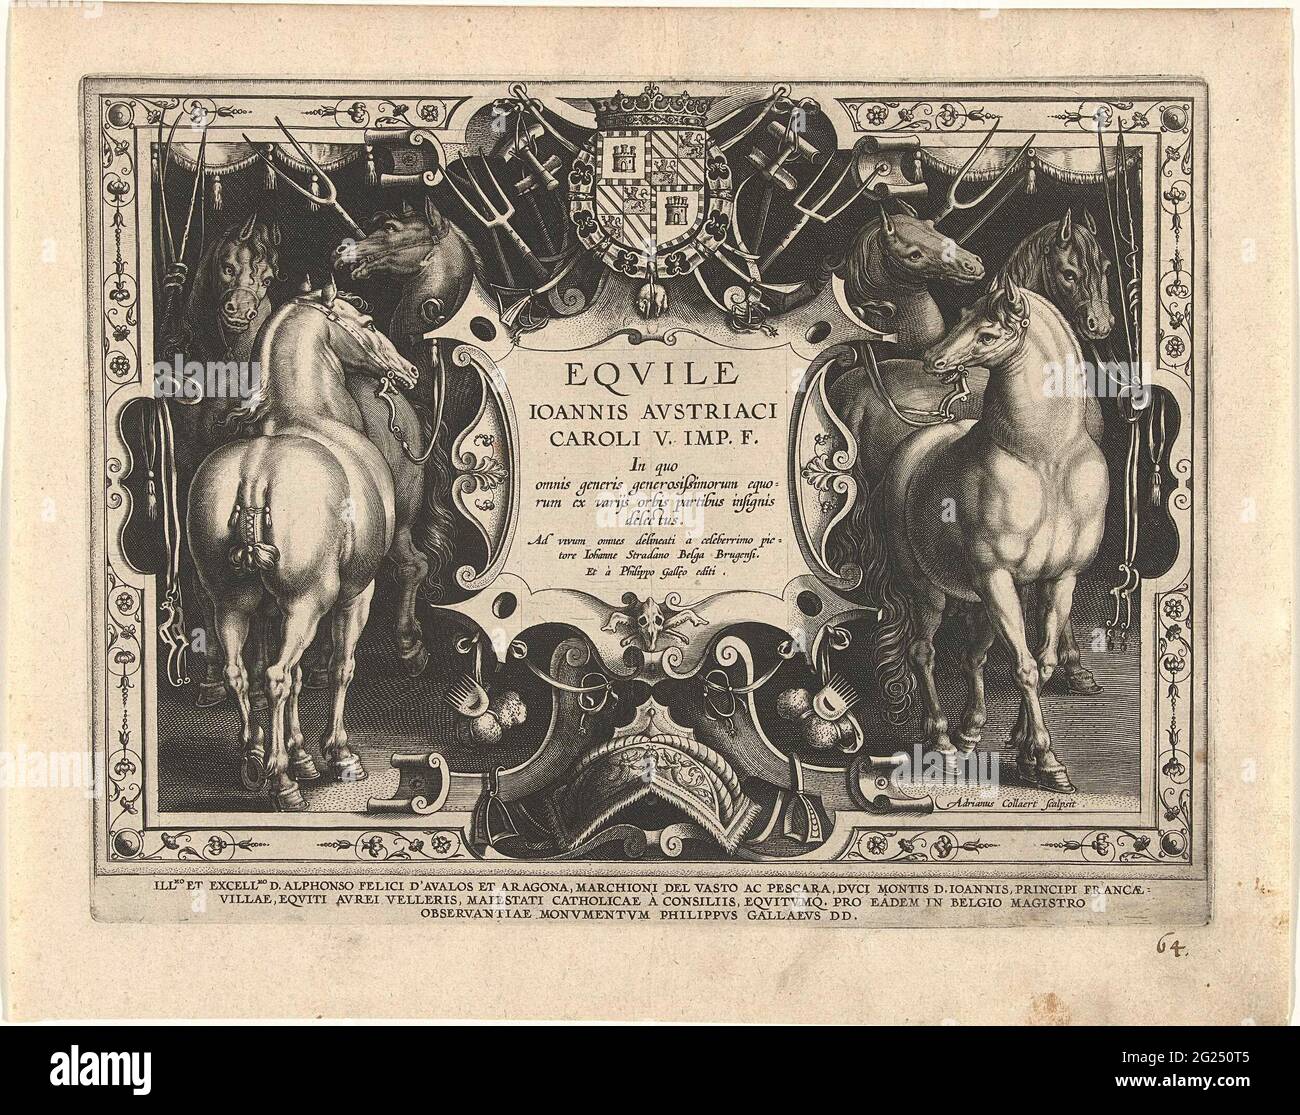 Title print of a series about the Royal Stables of Don Juan from Austria;  Horses; Equile Ioannis Austriaci Caroli; Eqvile Ioannis Avstriaci Caroli.  In an ornamental frame some horses and a cartouche